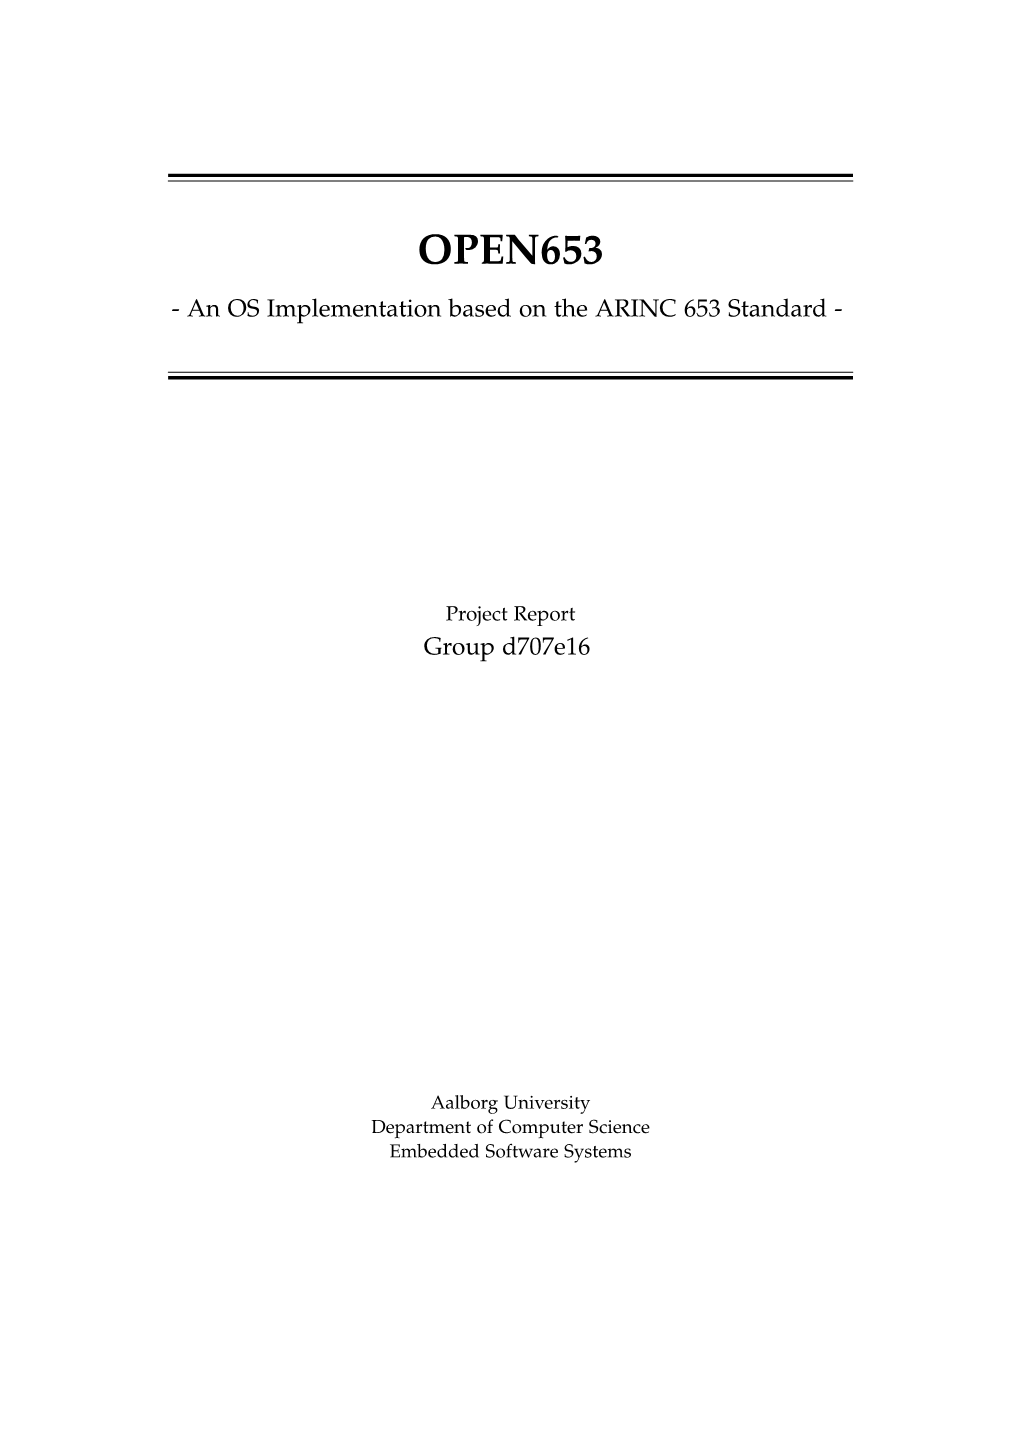 OPEN653 - an OS Implementation Based on the ARINC 653 Standard